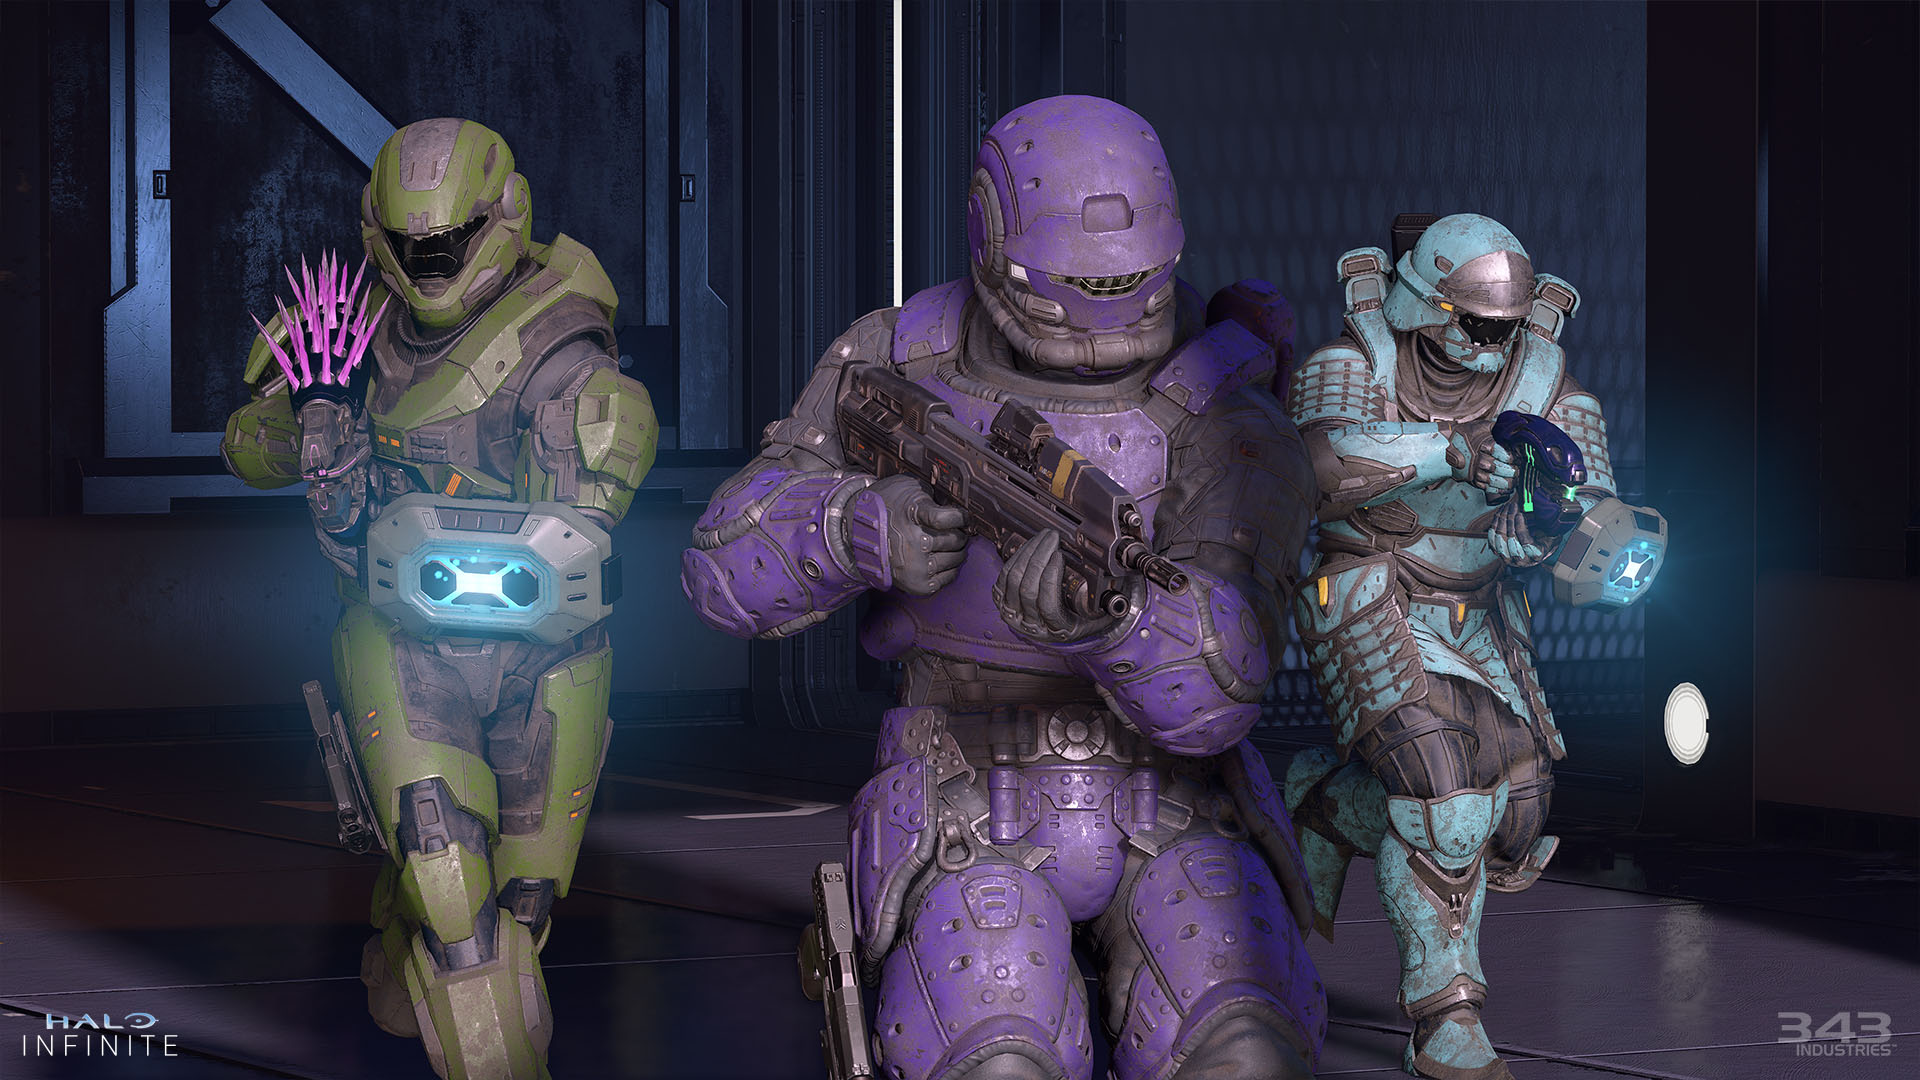 Halo Infinite screenshot showing multiple Spartan Armor Cores with Cadet Coatings